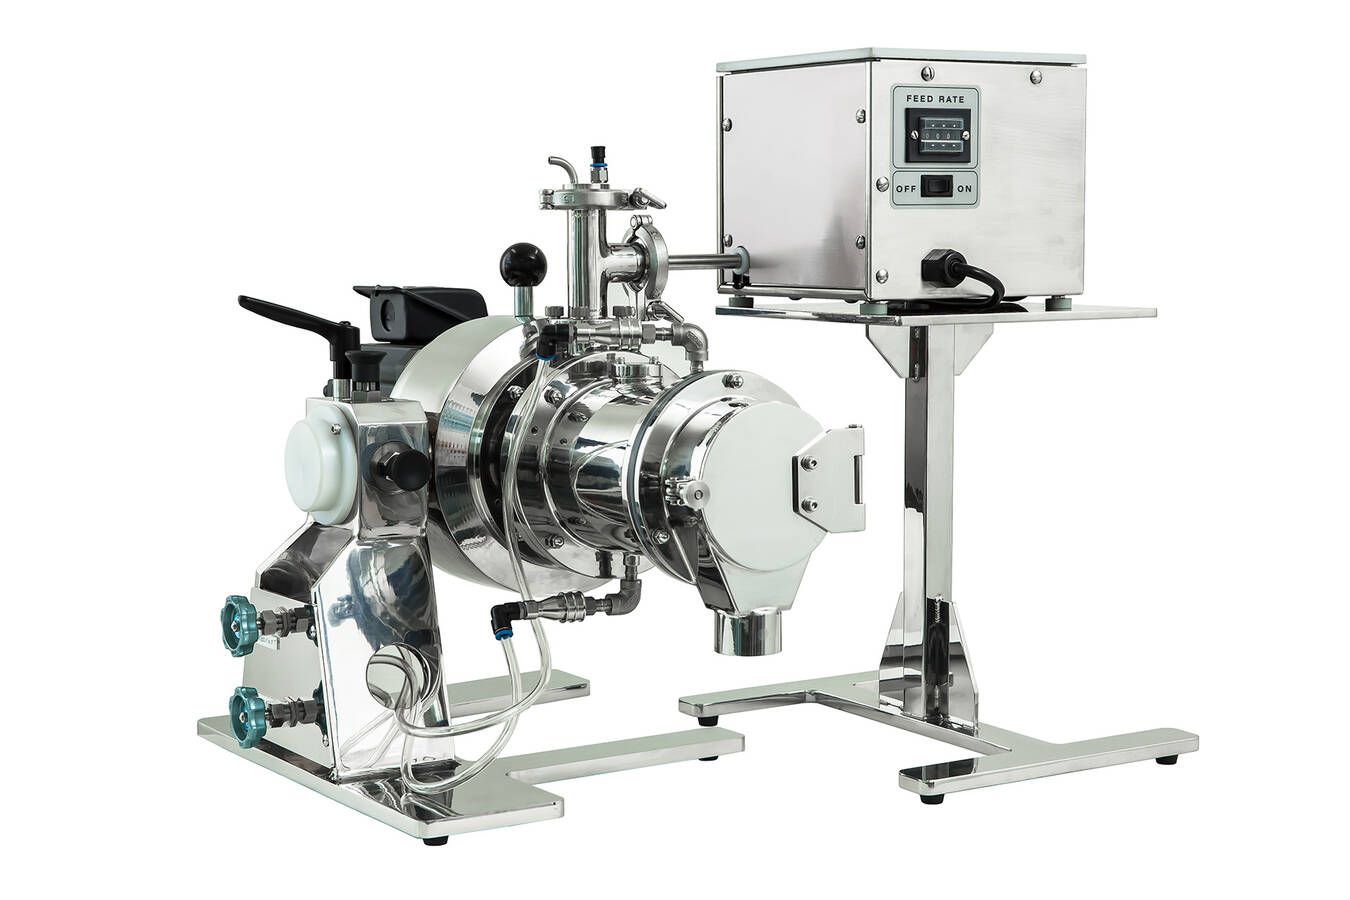 Laboratory-size Agitator Bead Mills for finest Dry-Grinding NETZSCH SpheRho® lab mill: highest fineness and an optimum degree of efficiency. For the development of new products, process optimization and sample production.